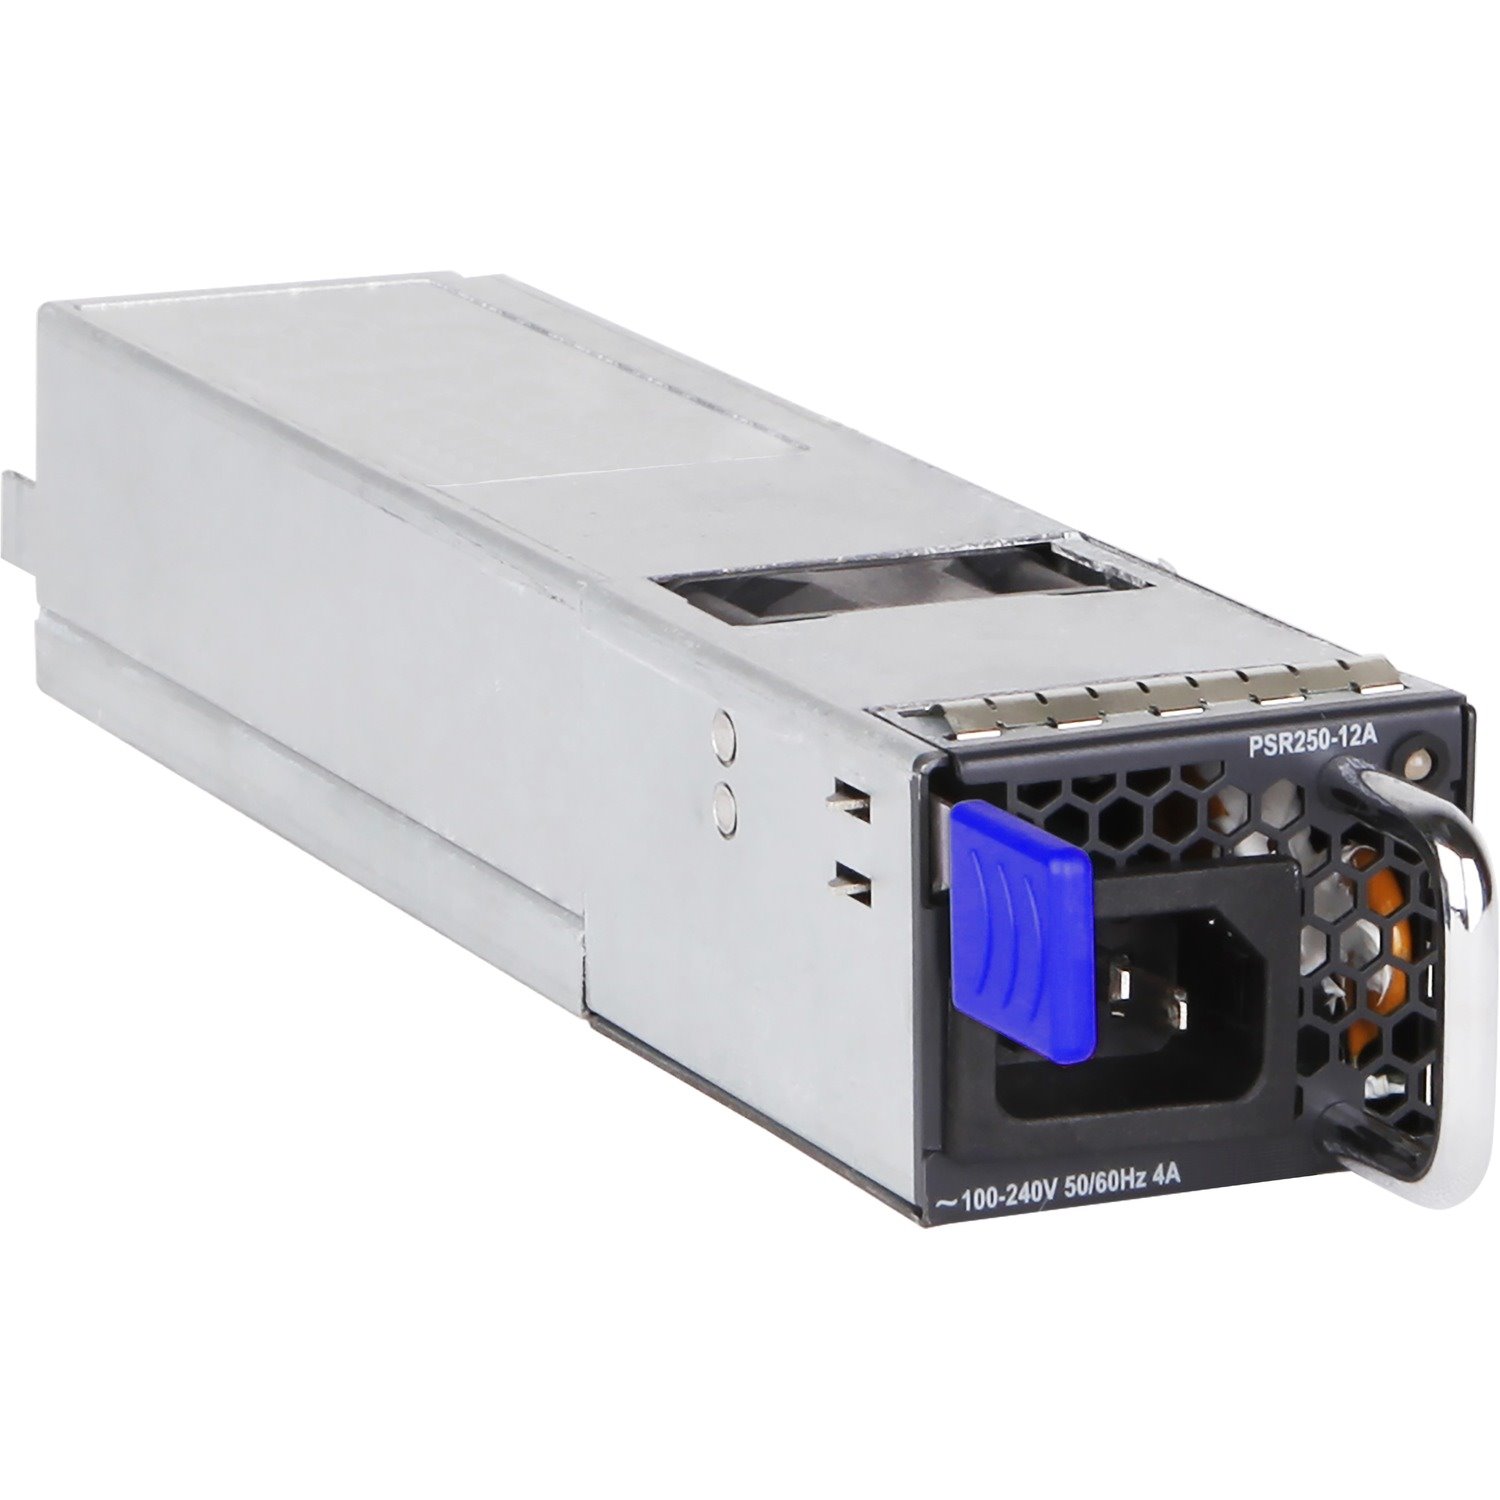 HPE FlexFabric 5710 250W Back-to-Front AC Power Supply